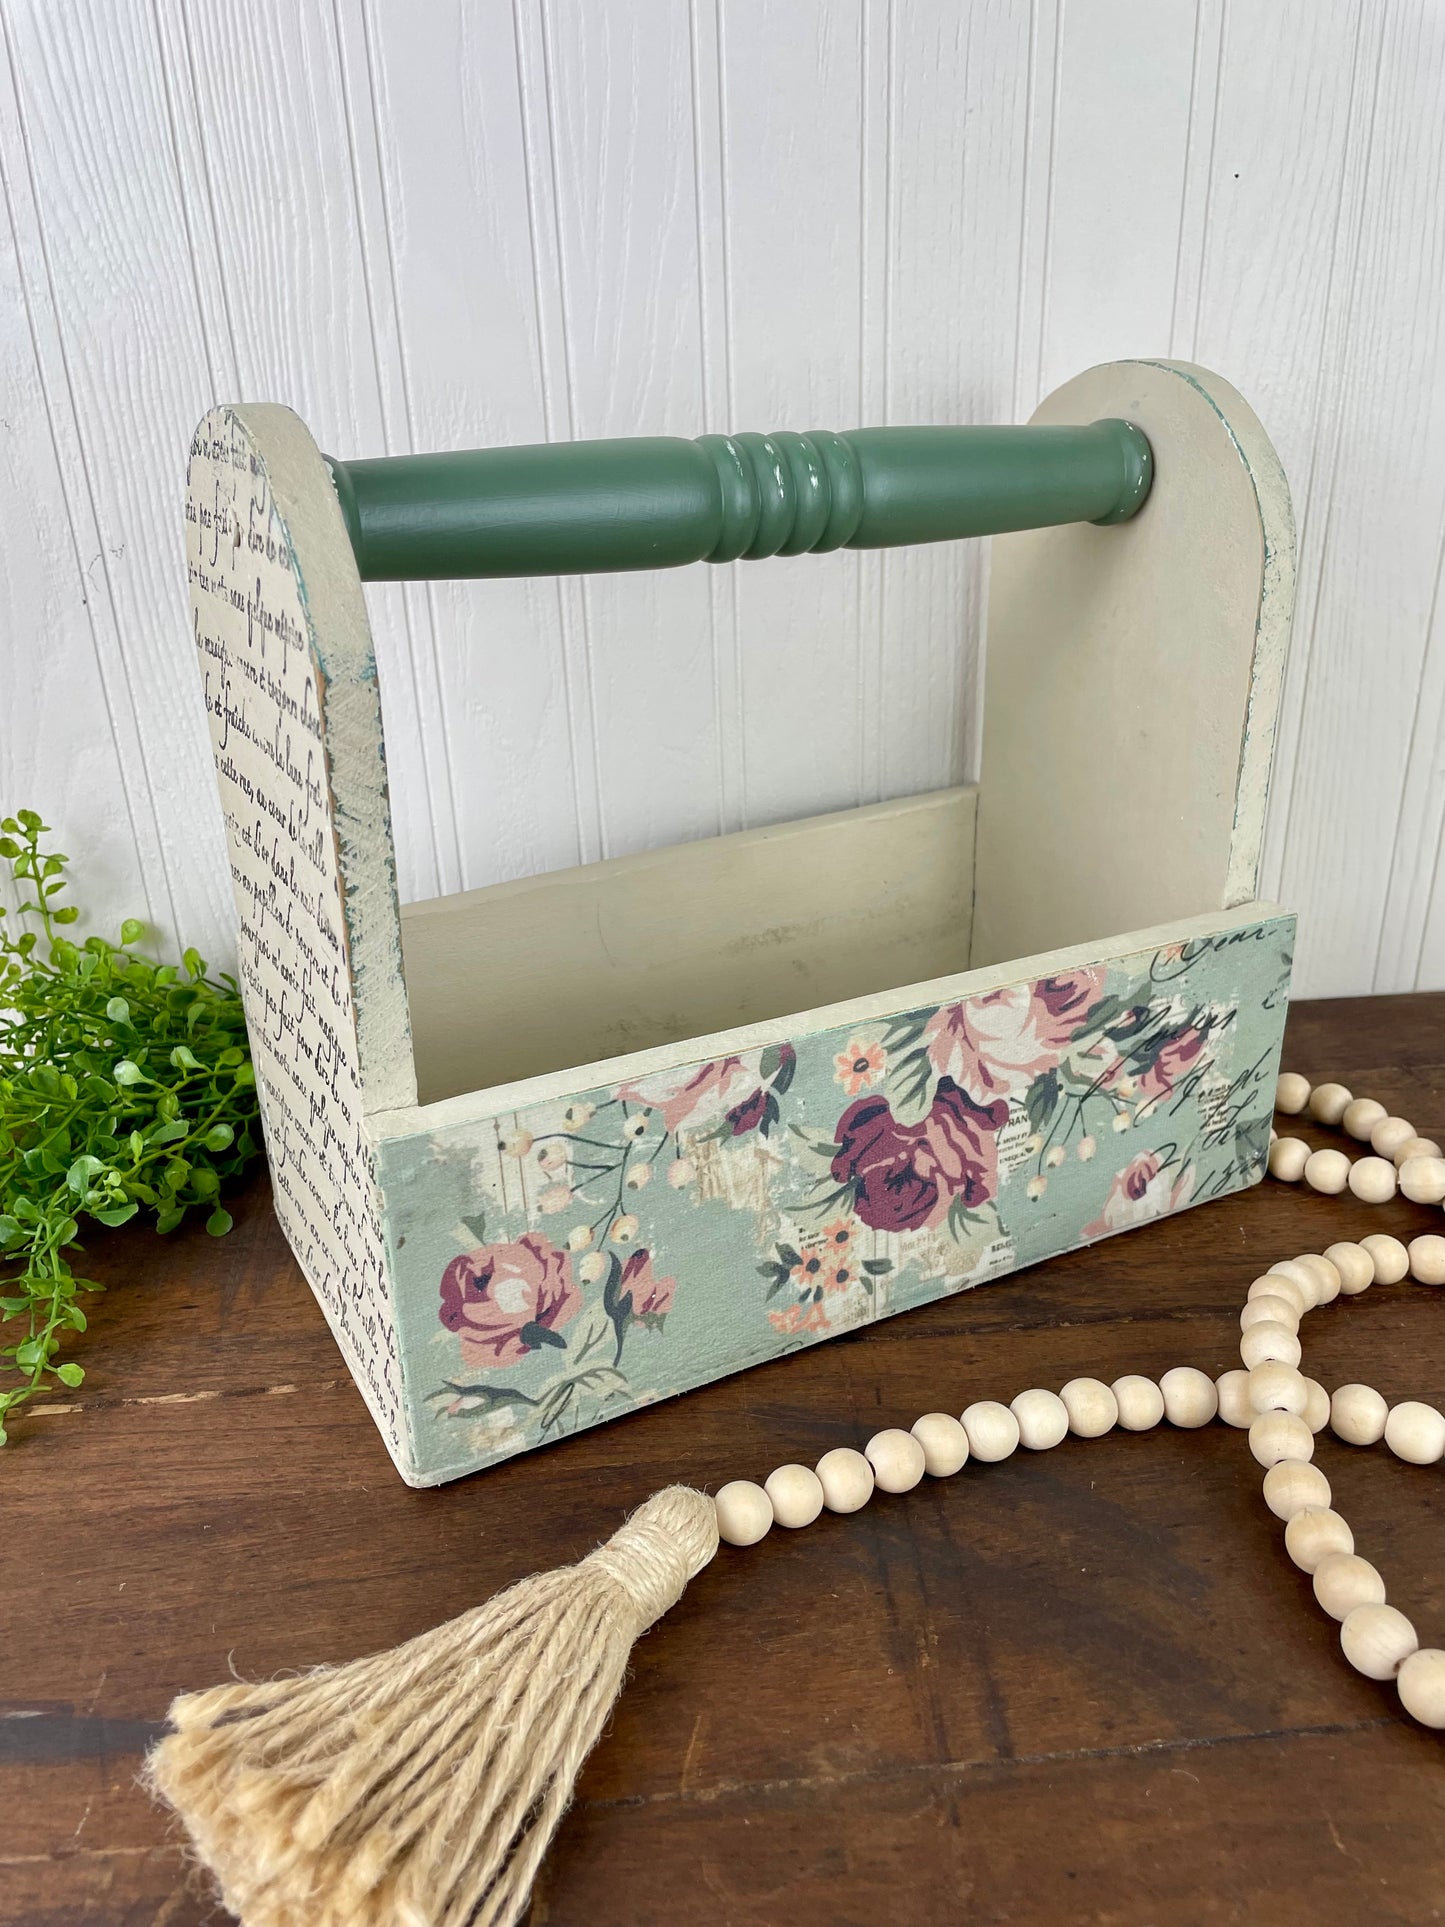 Handmade Upcycled Wooden Beige Tote with Green Handle